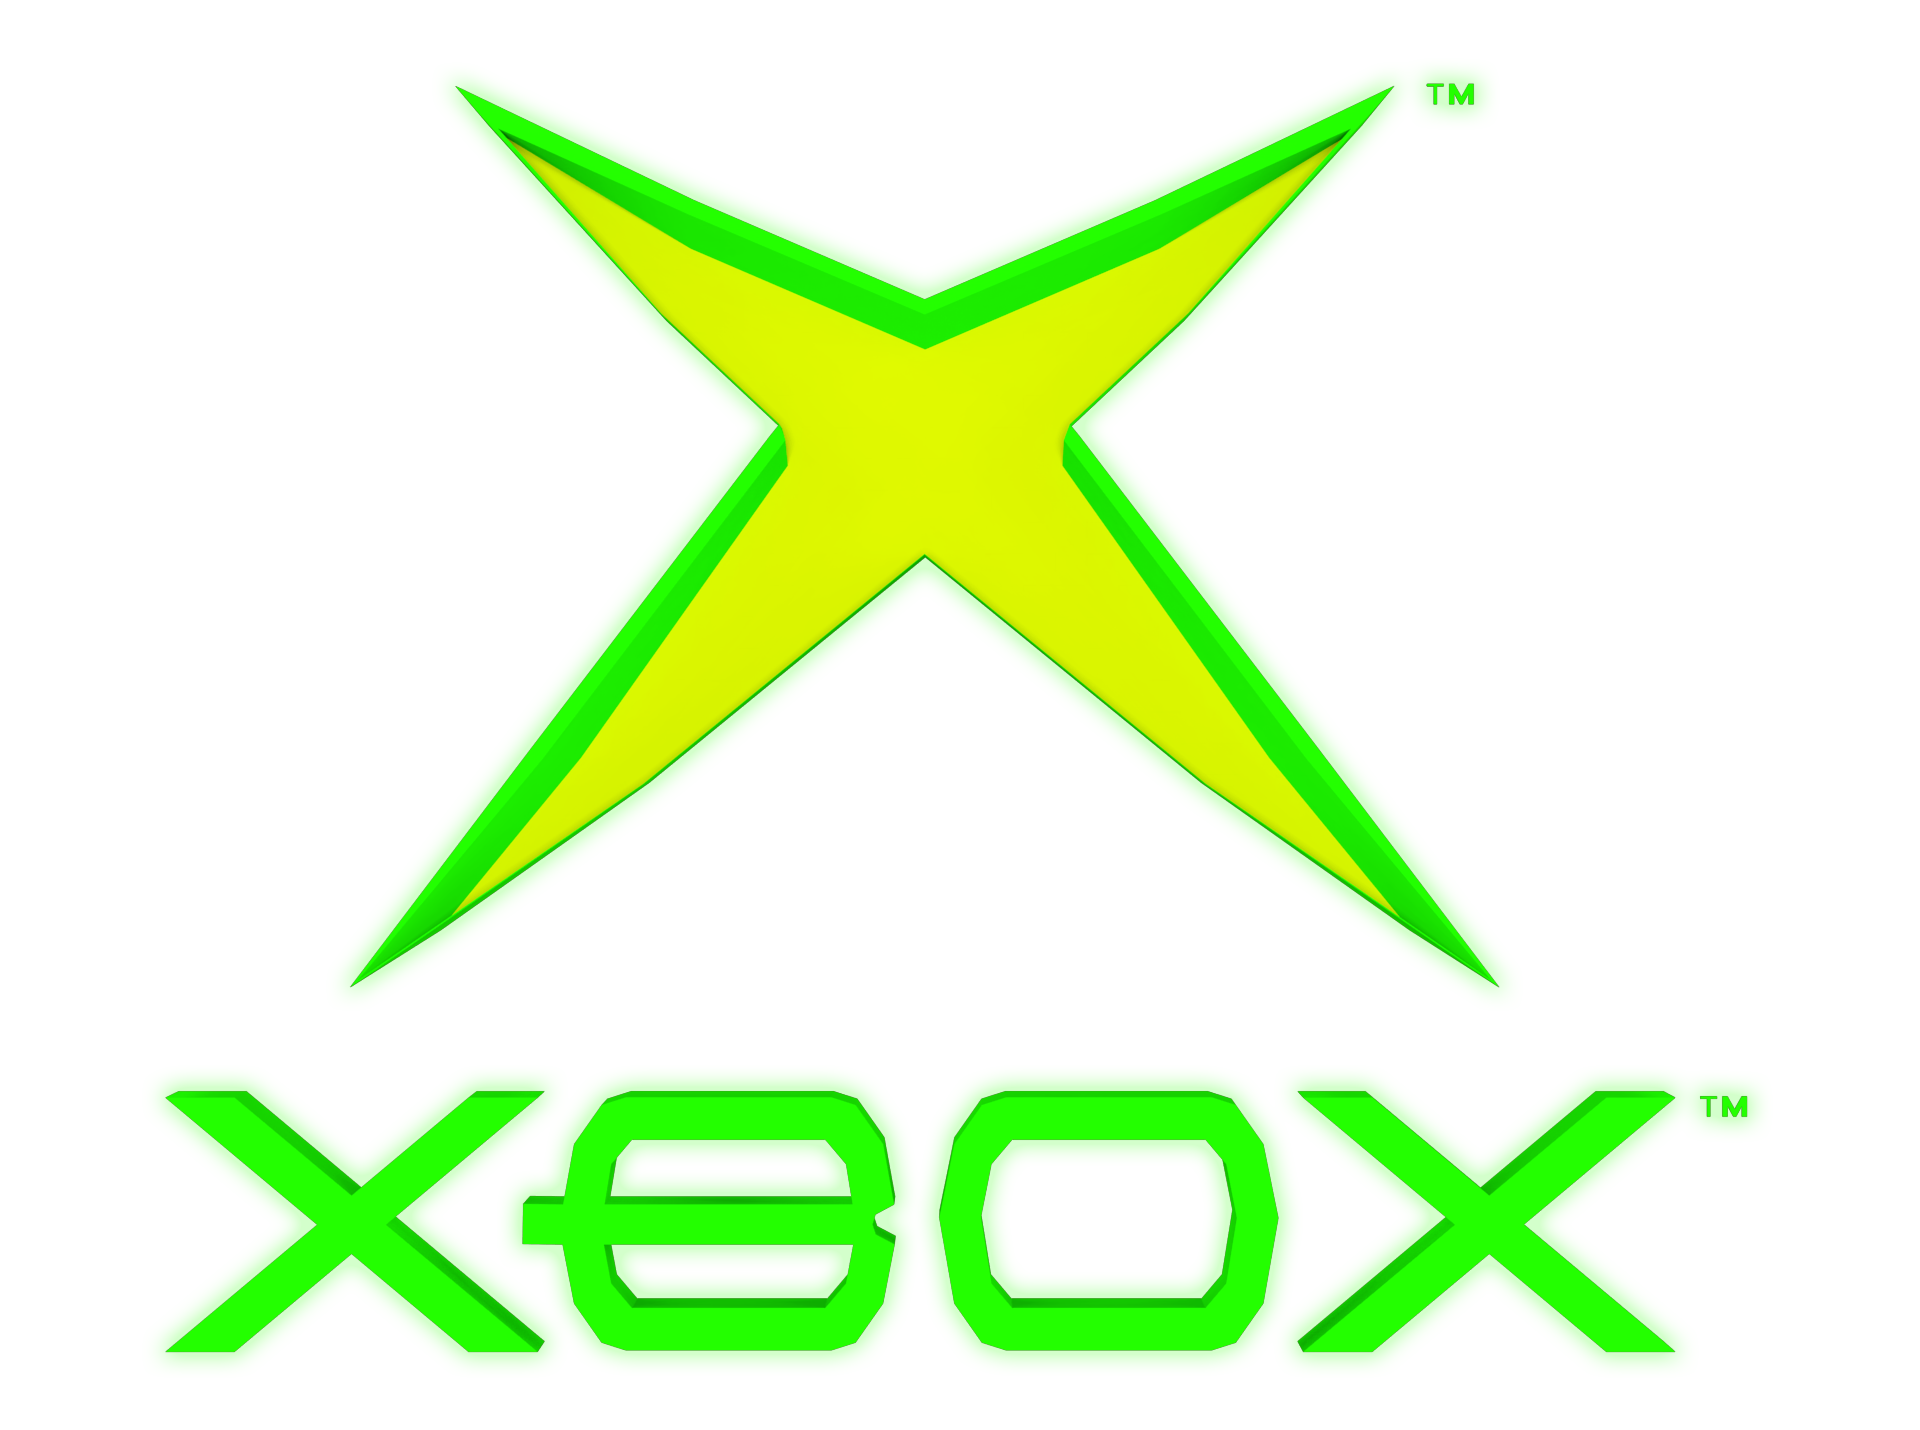 Xbox Game Studios Logo PNG by Playbox36 on DeviantArt